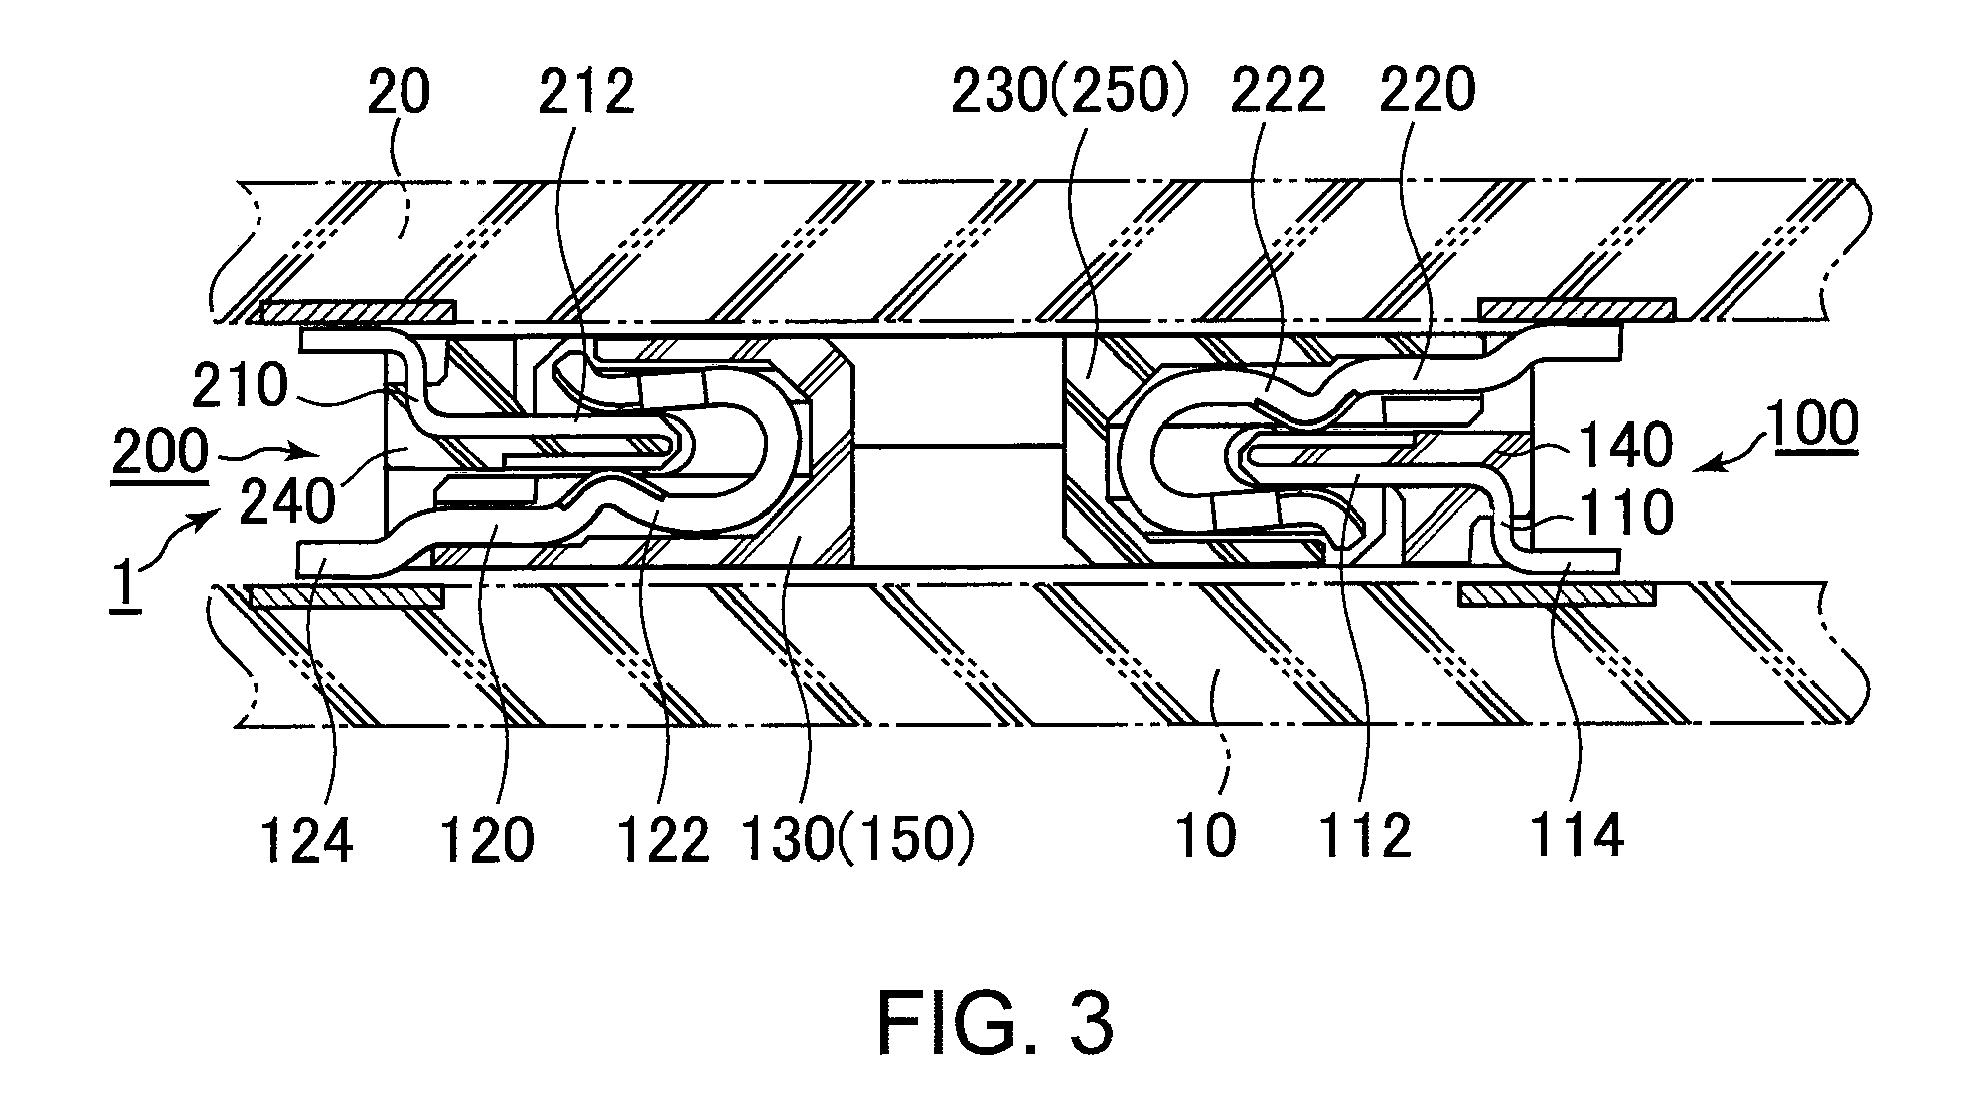 Connector assembly including first connector and second connector configured to be mounted on a circuit board and easily mated